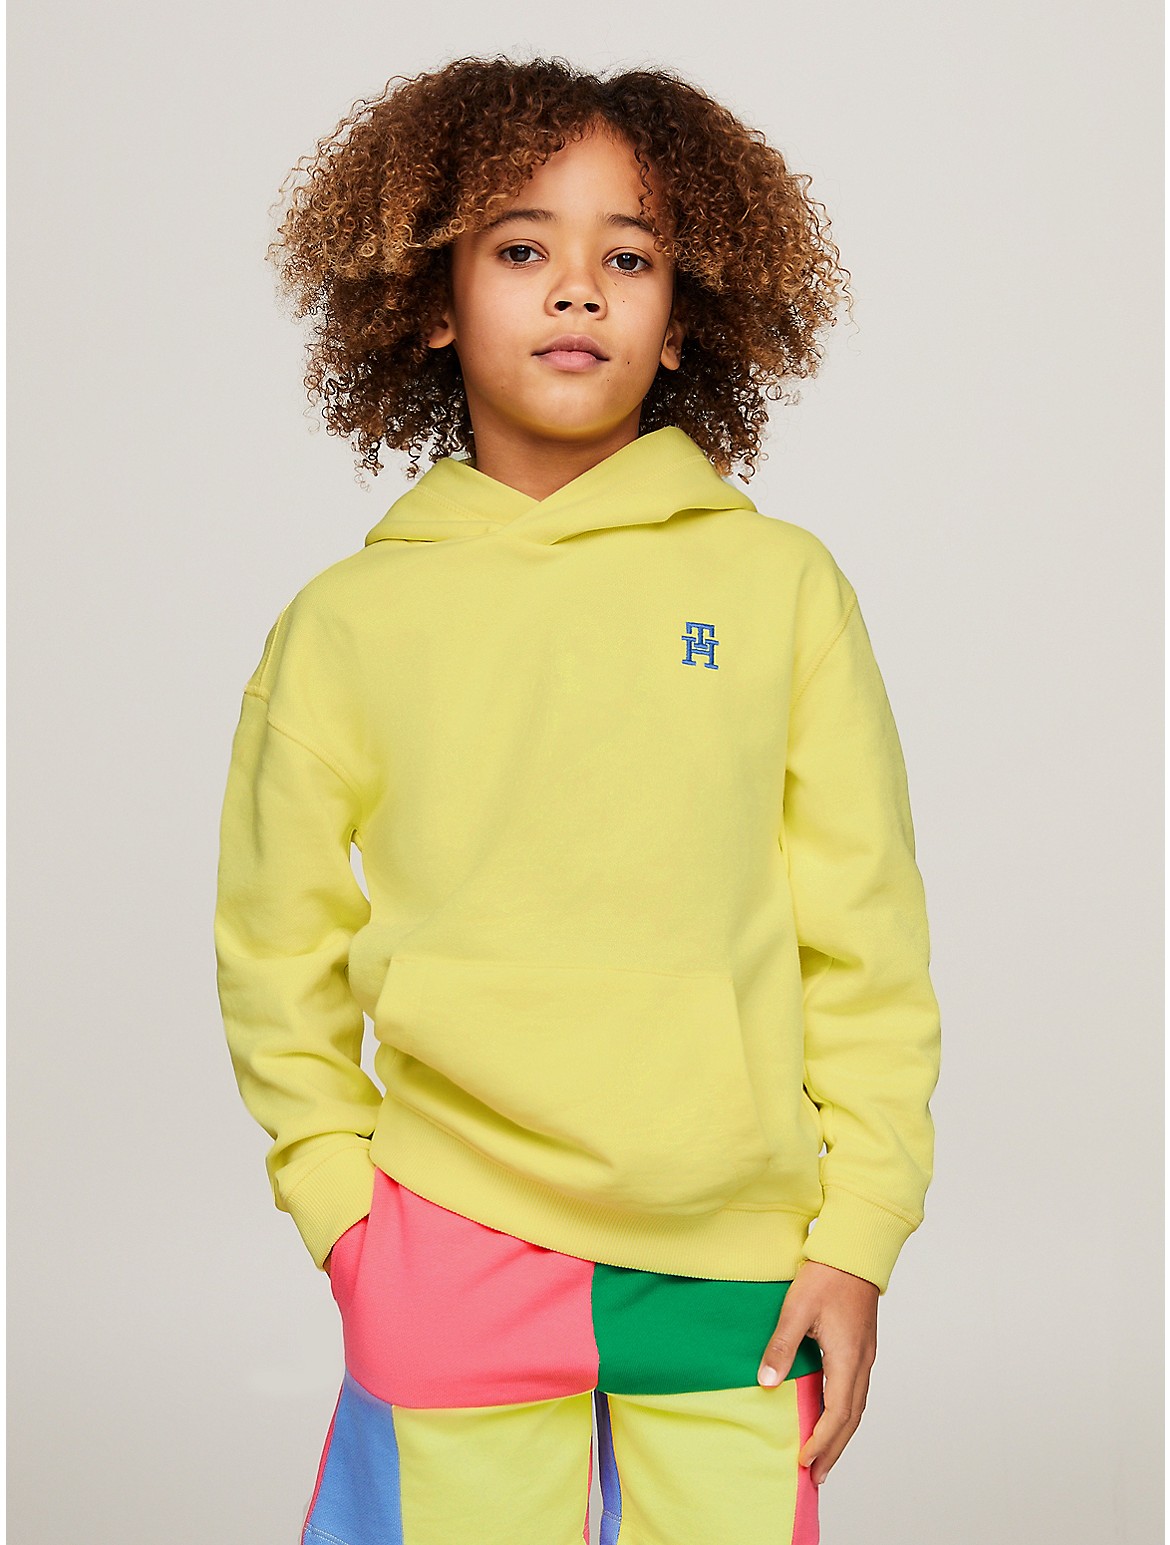 Tommy Hilfiger Kids' Embroidered TH Hoodie